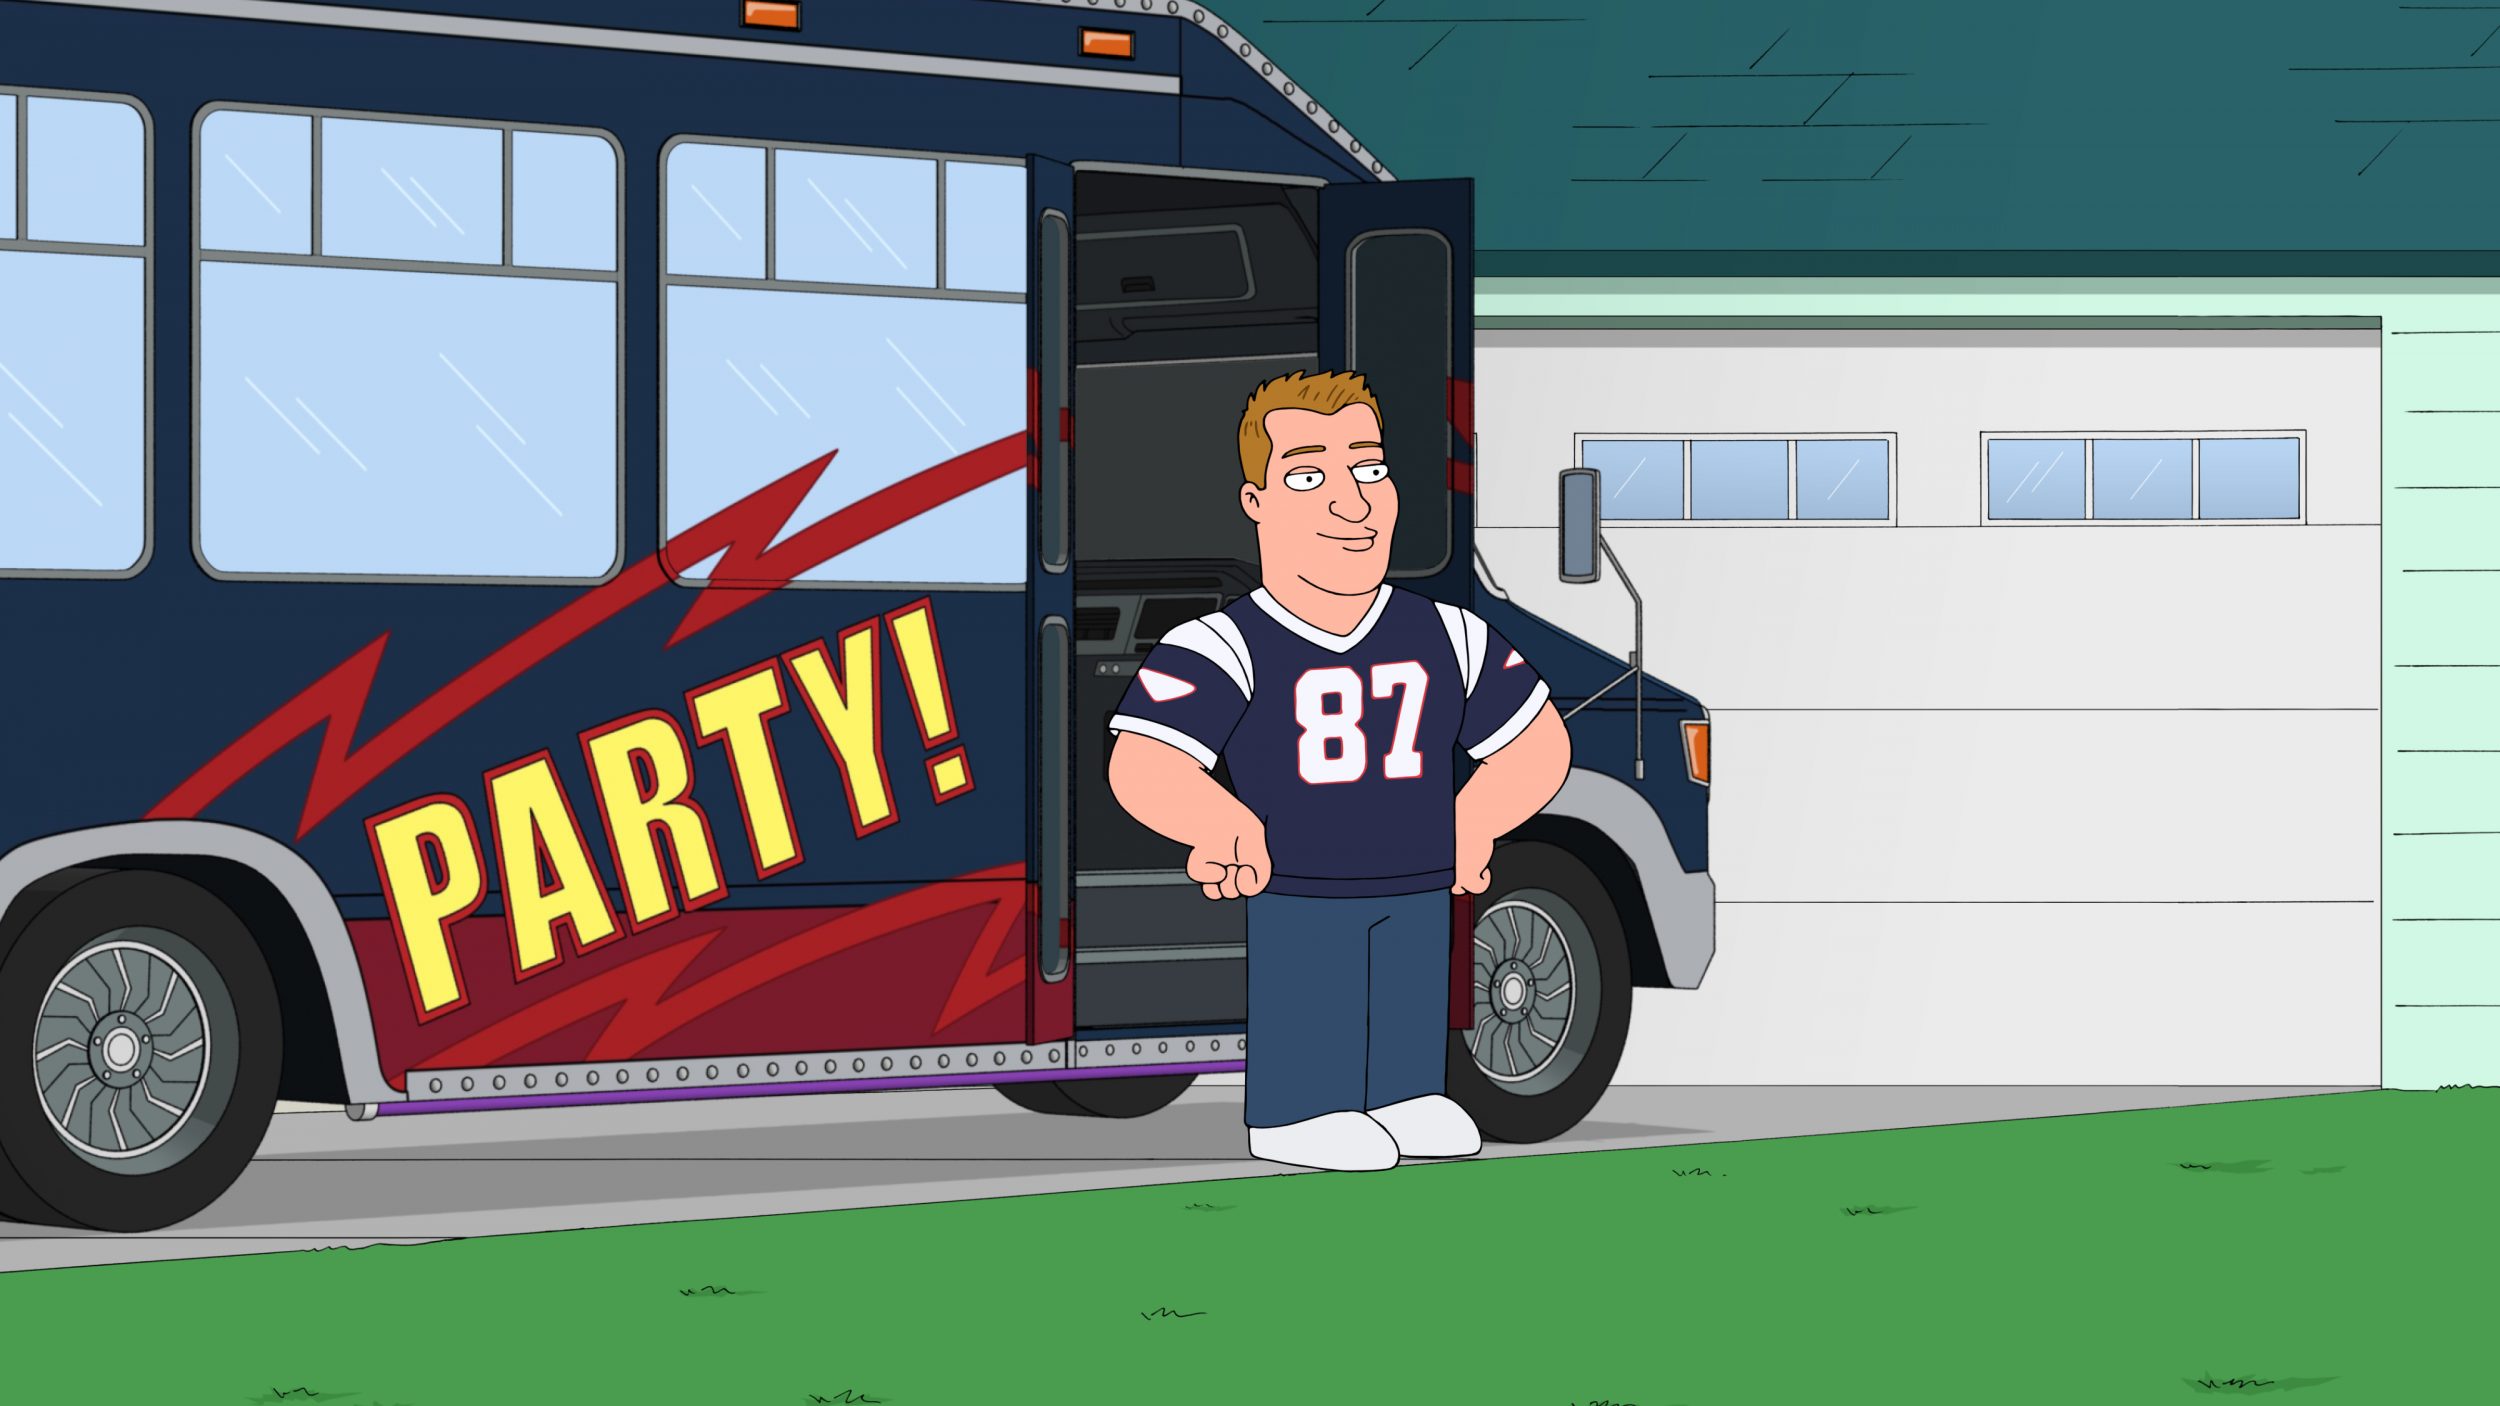 FAMILY GUY: Rob Gronkowski, of the New England Patriots, moves into the house behind the Griffins in the ÒGronkowsbeesÓ episode of FAMILY GUY airing Sunday, Jan. 15 (9:30-10:00 PM ET/PT) on FOX. FAMILY GUY ª and © 2016 TCFFC ALL RIGHTS RESERVED. CR: FOX